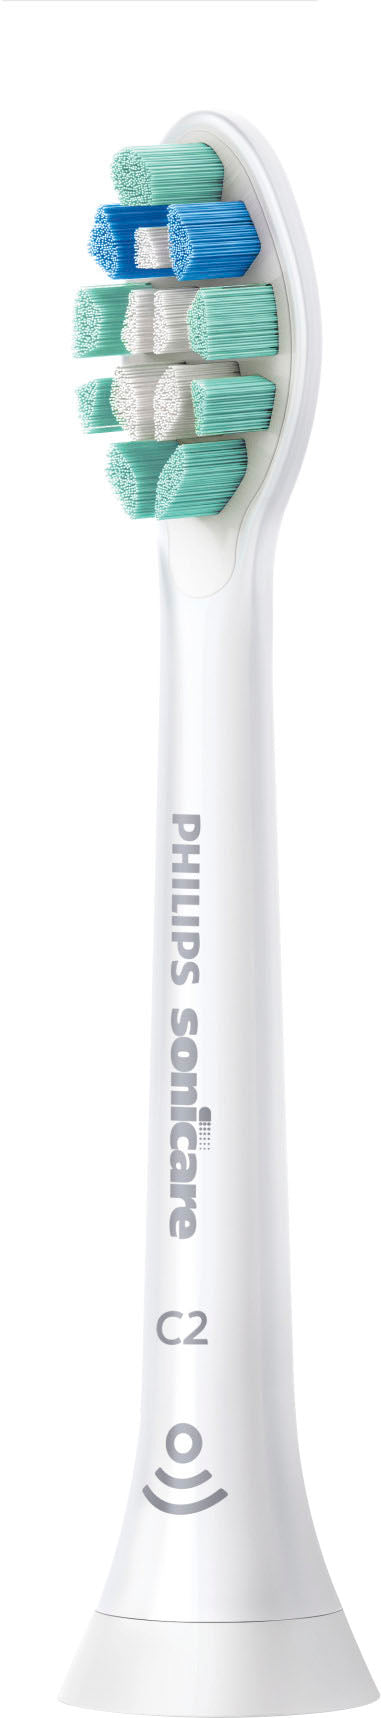 Philips Sonicare 4100 Power Toothbrush - Deep Pink_11